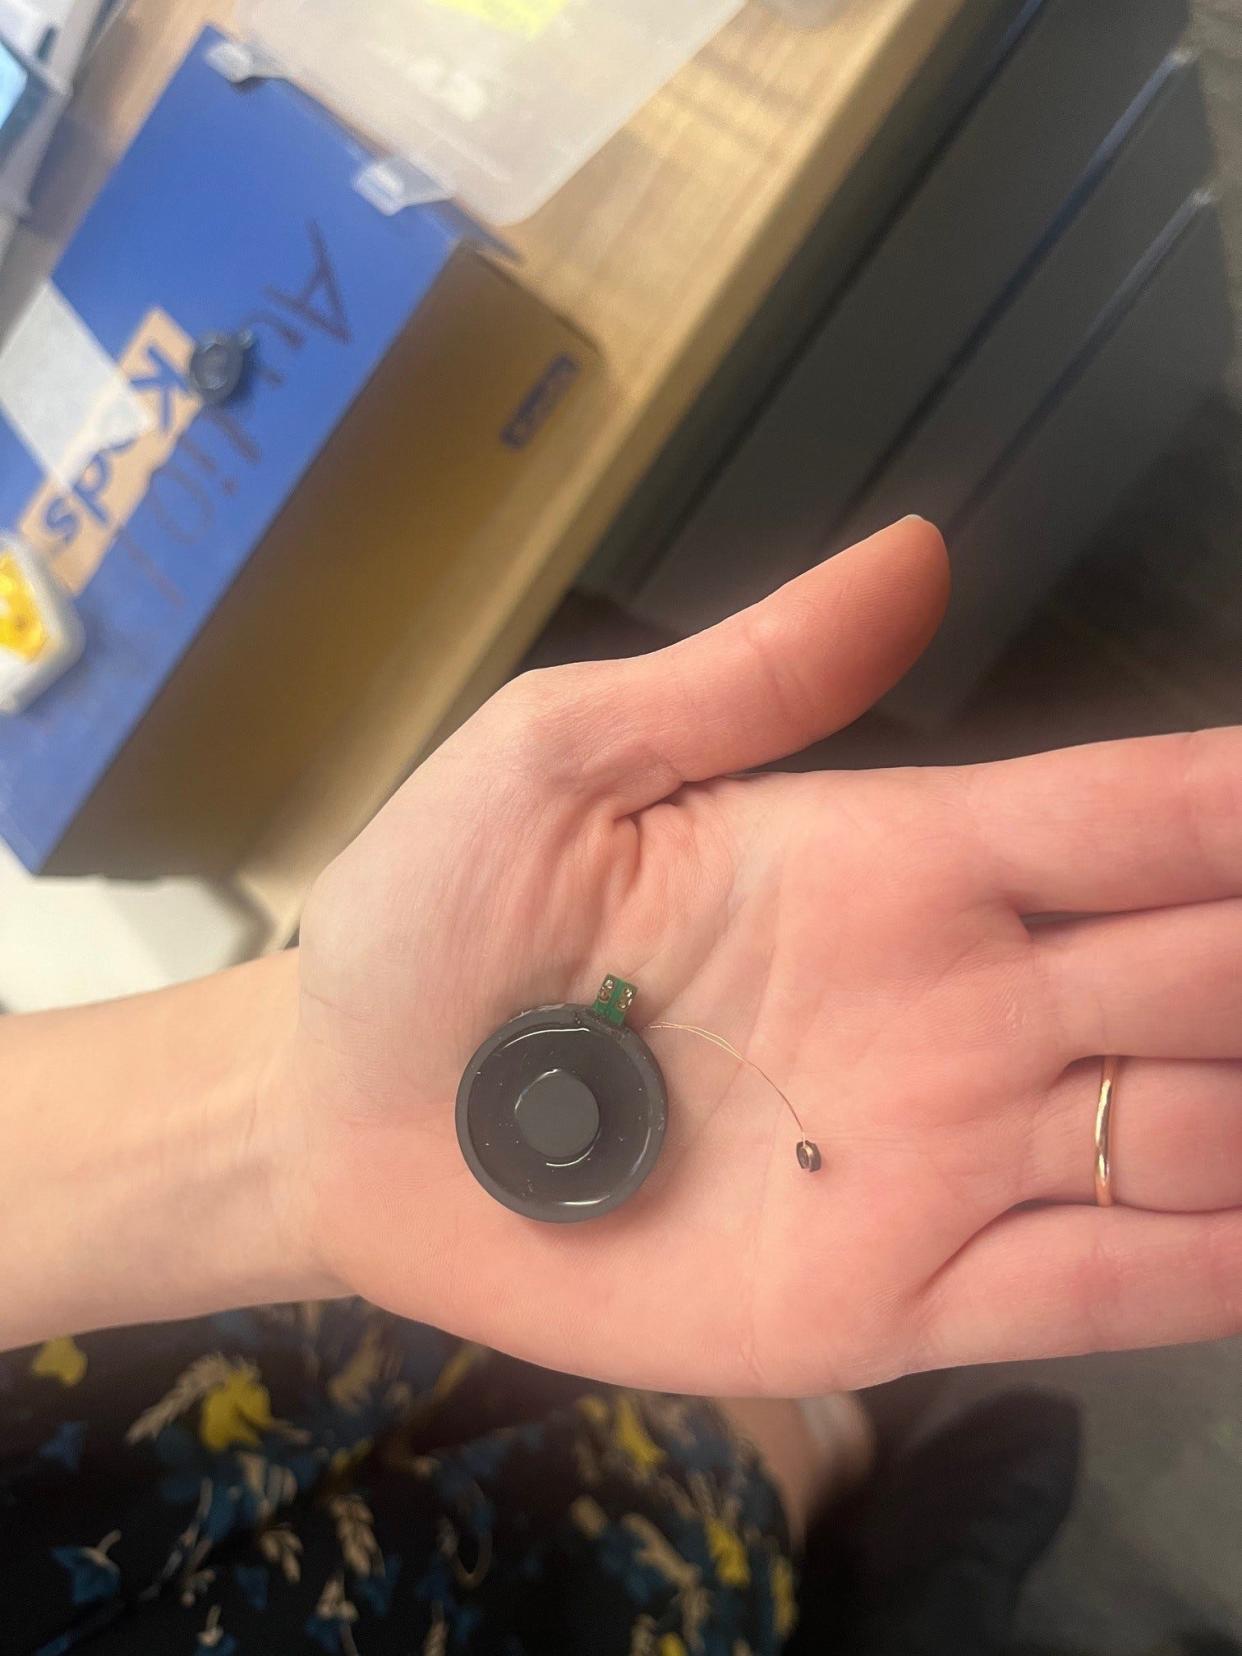 Resonant Link's smallest wireless charging system and the medical device it charges, which attaches to a person's tooth and monitors saliva for signs of disease, as seen on Jan. 31, 2024 at the company's headquarters and production facility in South Burlington.